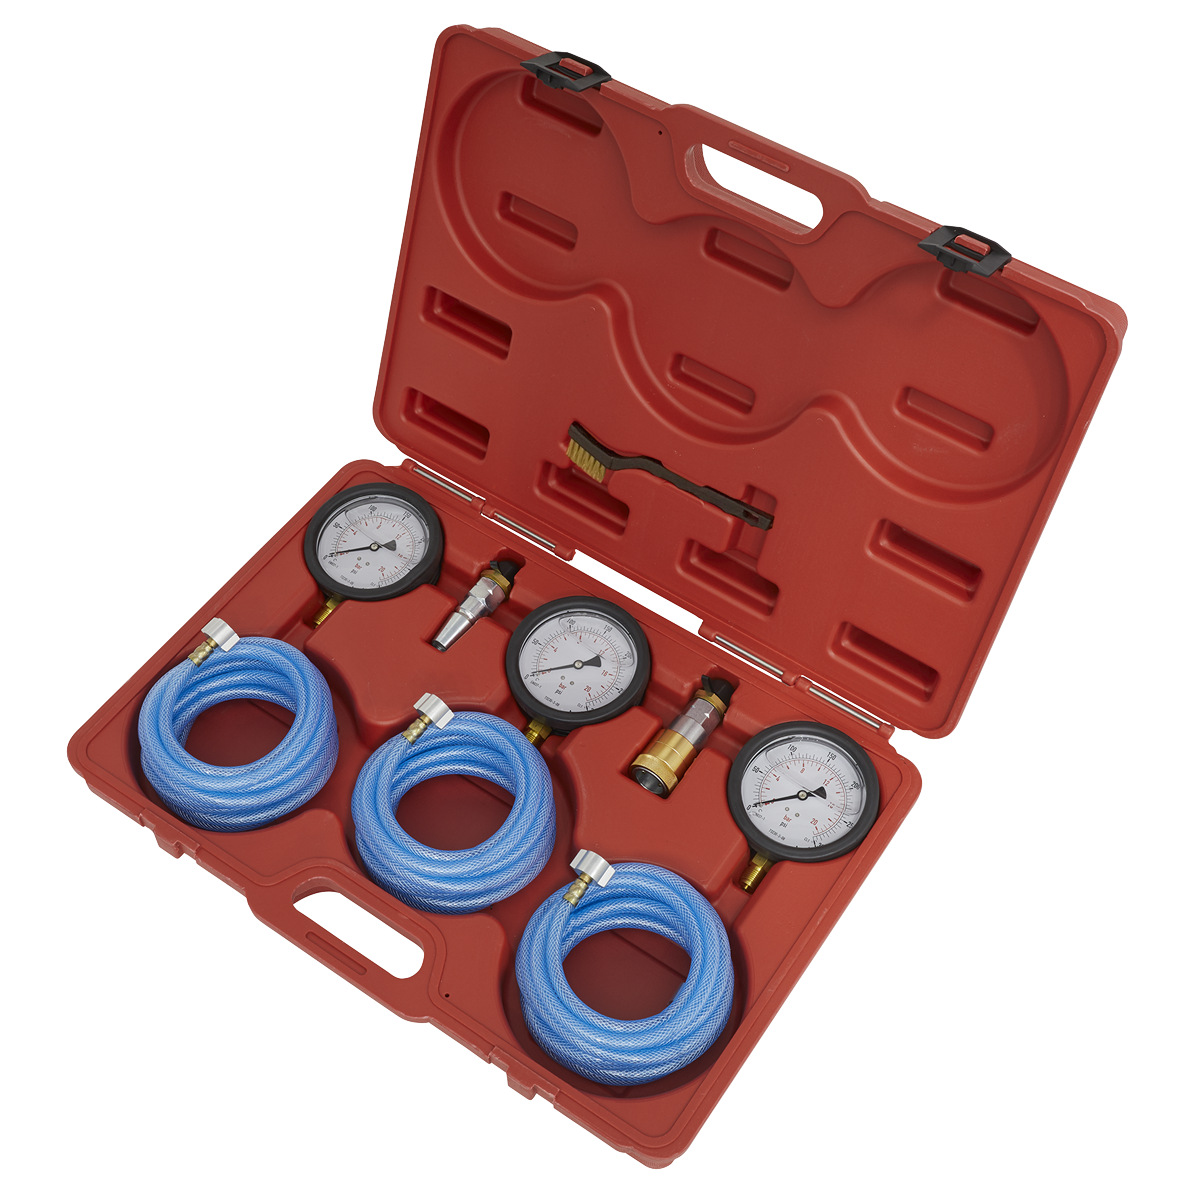 Features three large 0-20bar(0-300psi) gauges with rubber bumper.